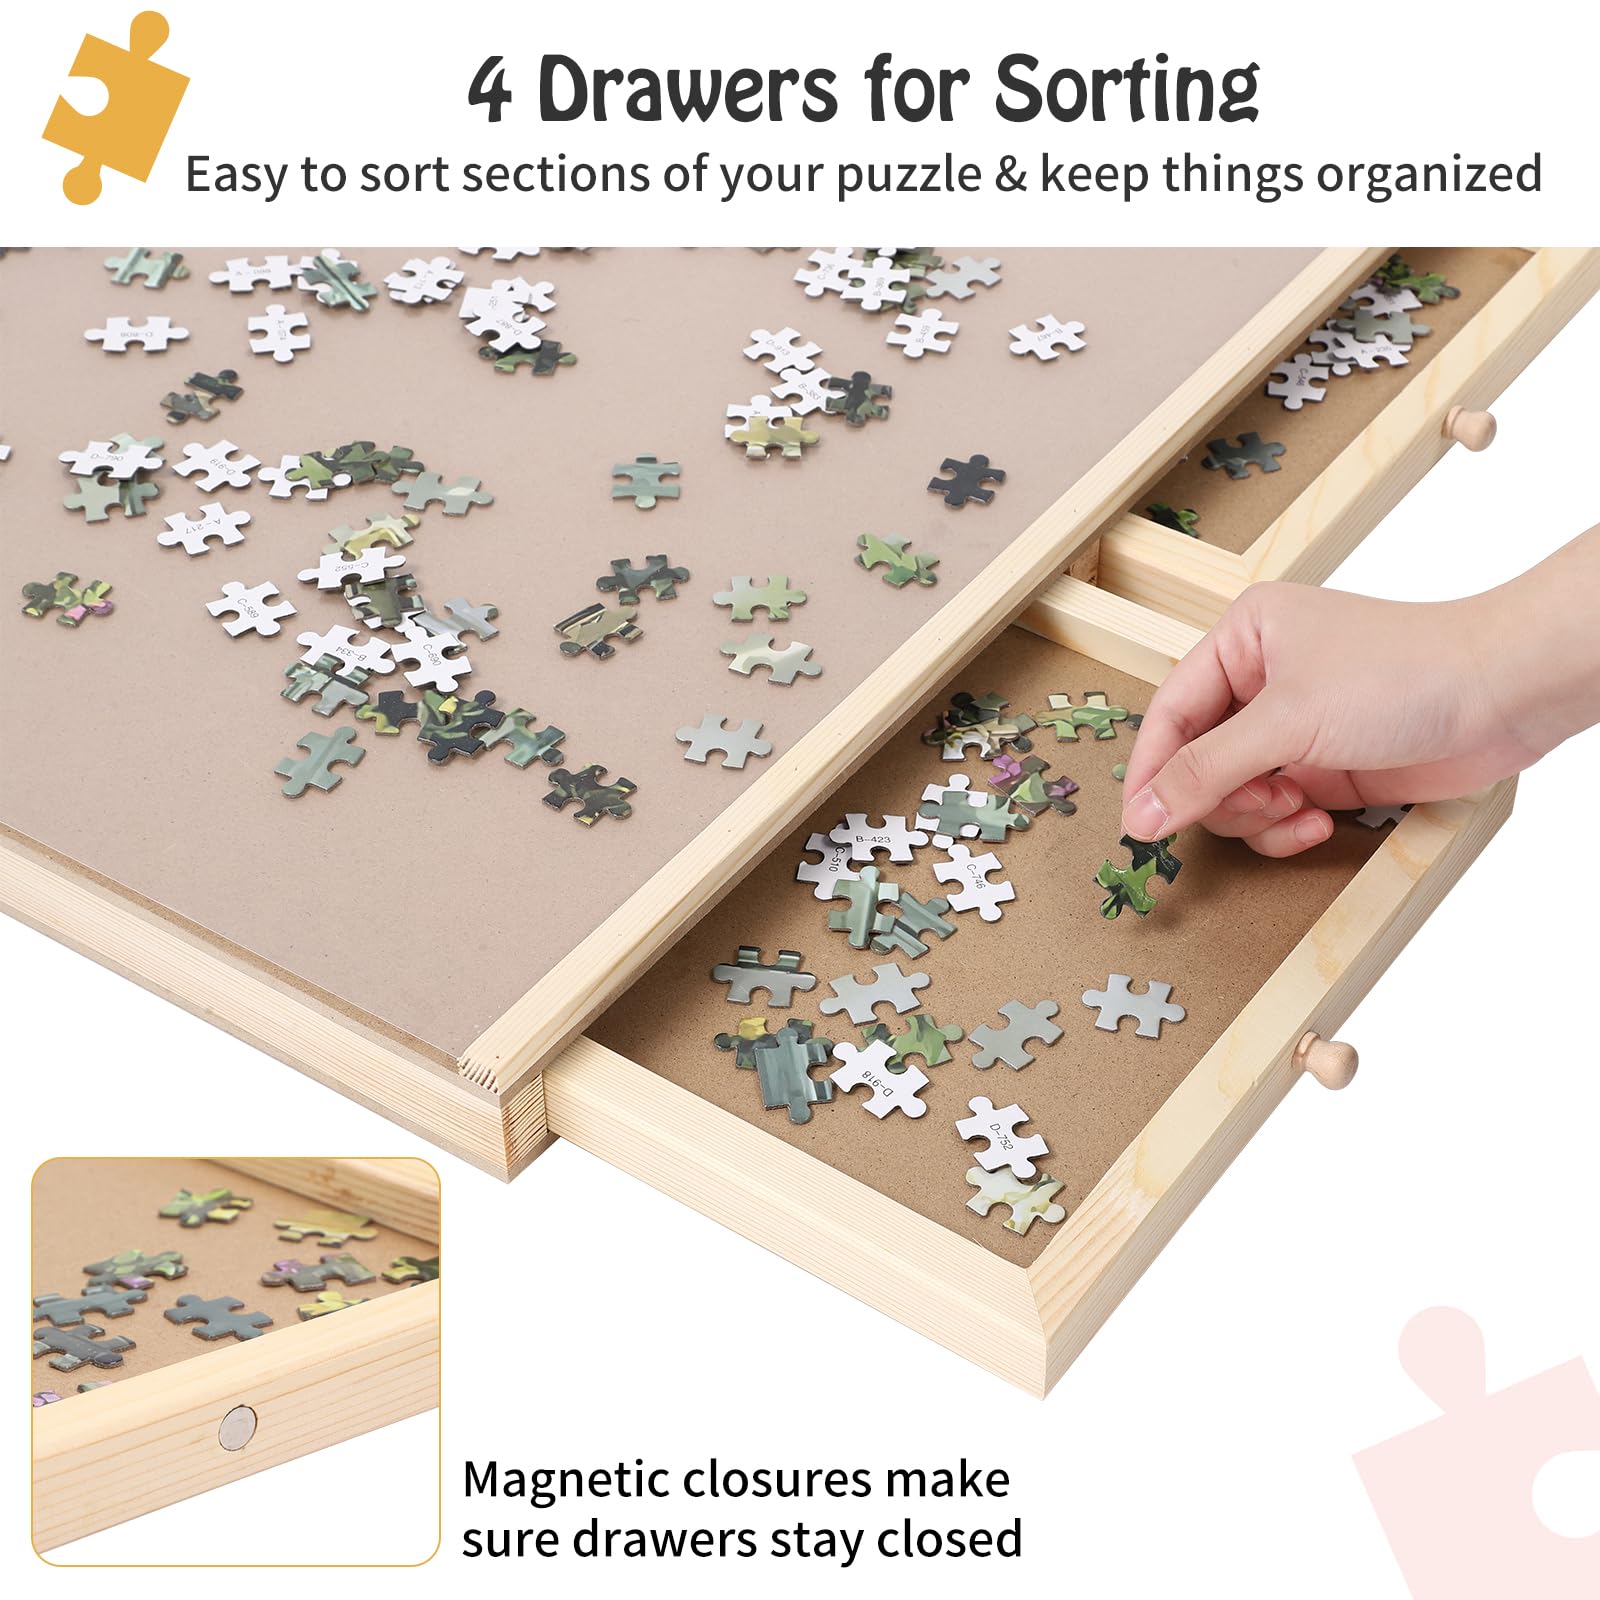 Wooden Rotating Puzzle Board with 4 Magnetic Sorting Drawers & Protective Cover,1000 Pieces Jigsaw Puzzle Table for Adults and Kids,22